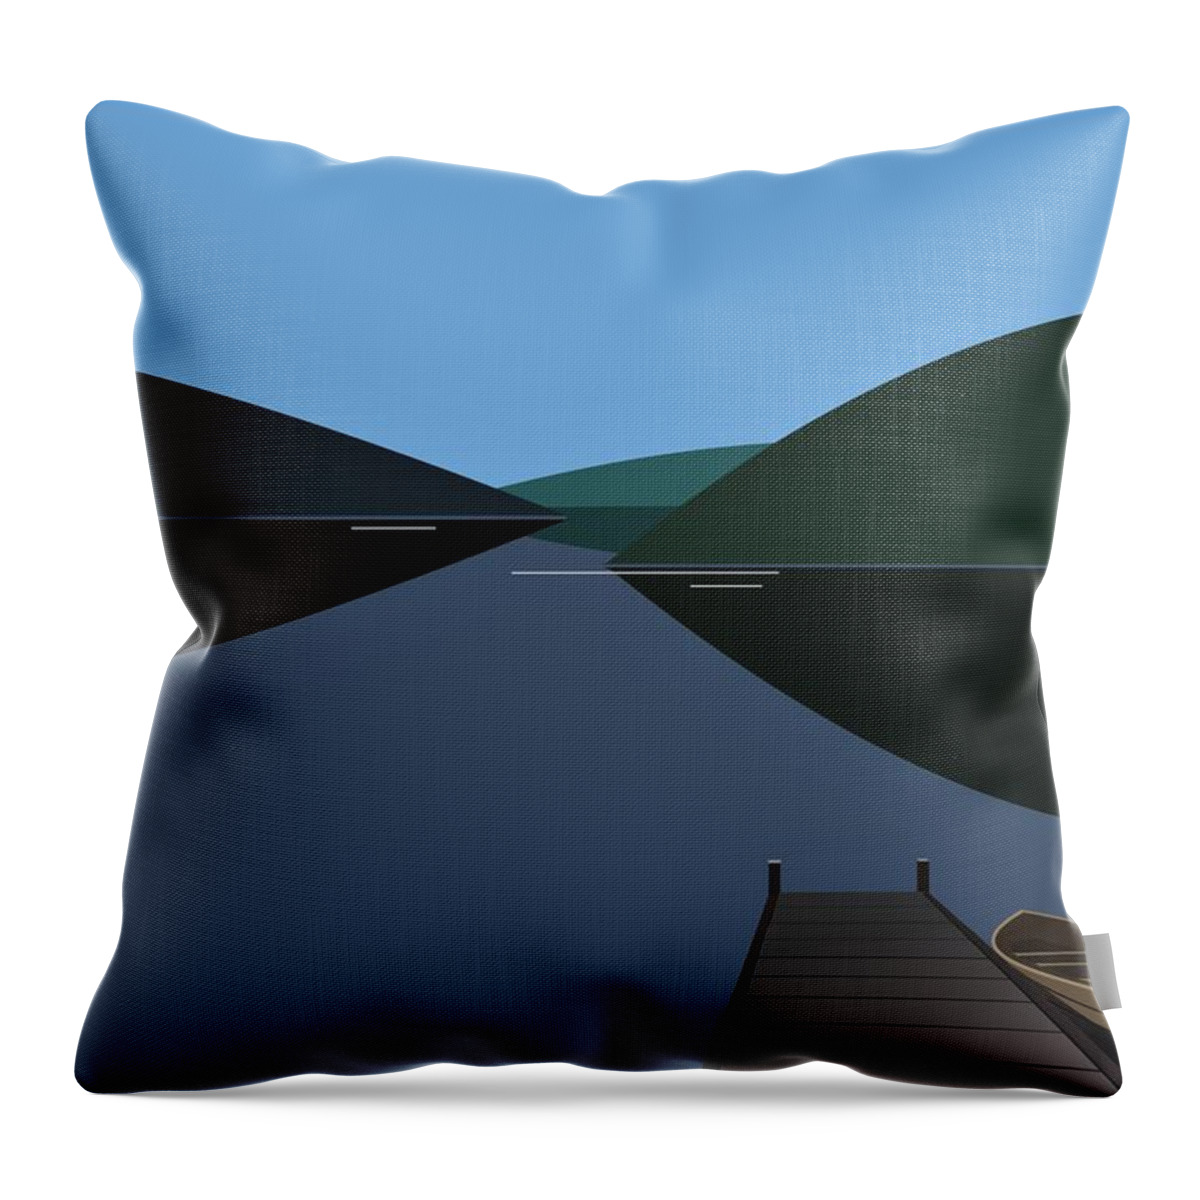 Jetty Throw Pillow featuring the digital art The Jetty by Fatline Graphic Art